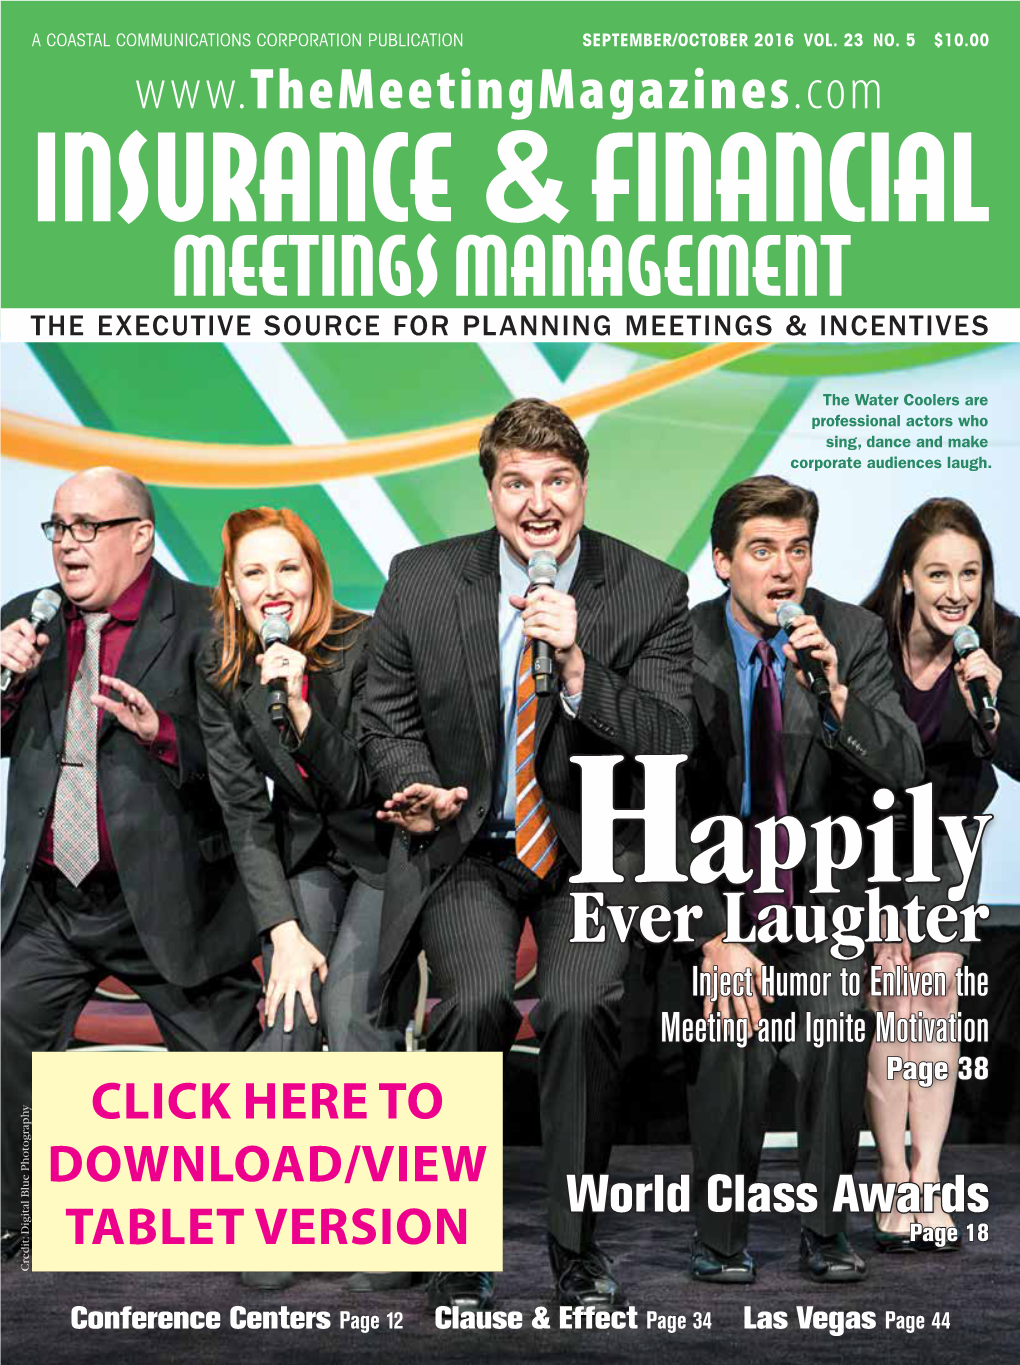 Happily Ever Laughter by Michael Murphy Inject Humor to Enliven the Meeting and Ignite Motivation 50 CORPORATE LADDER by Derek Reveron 50 READER SERVICES